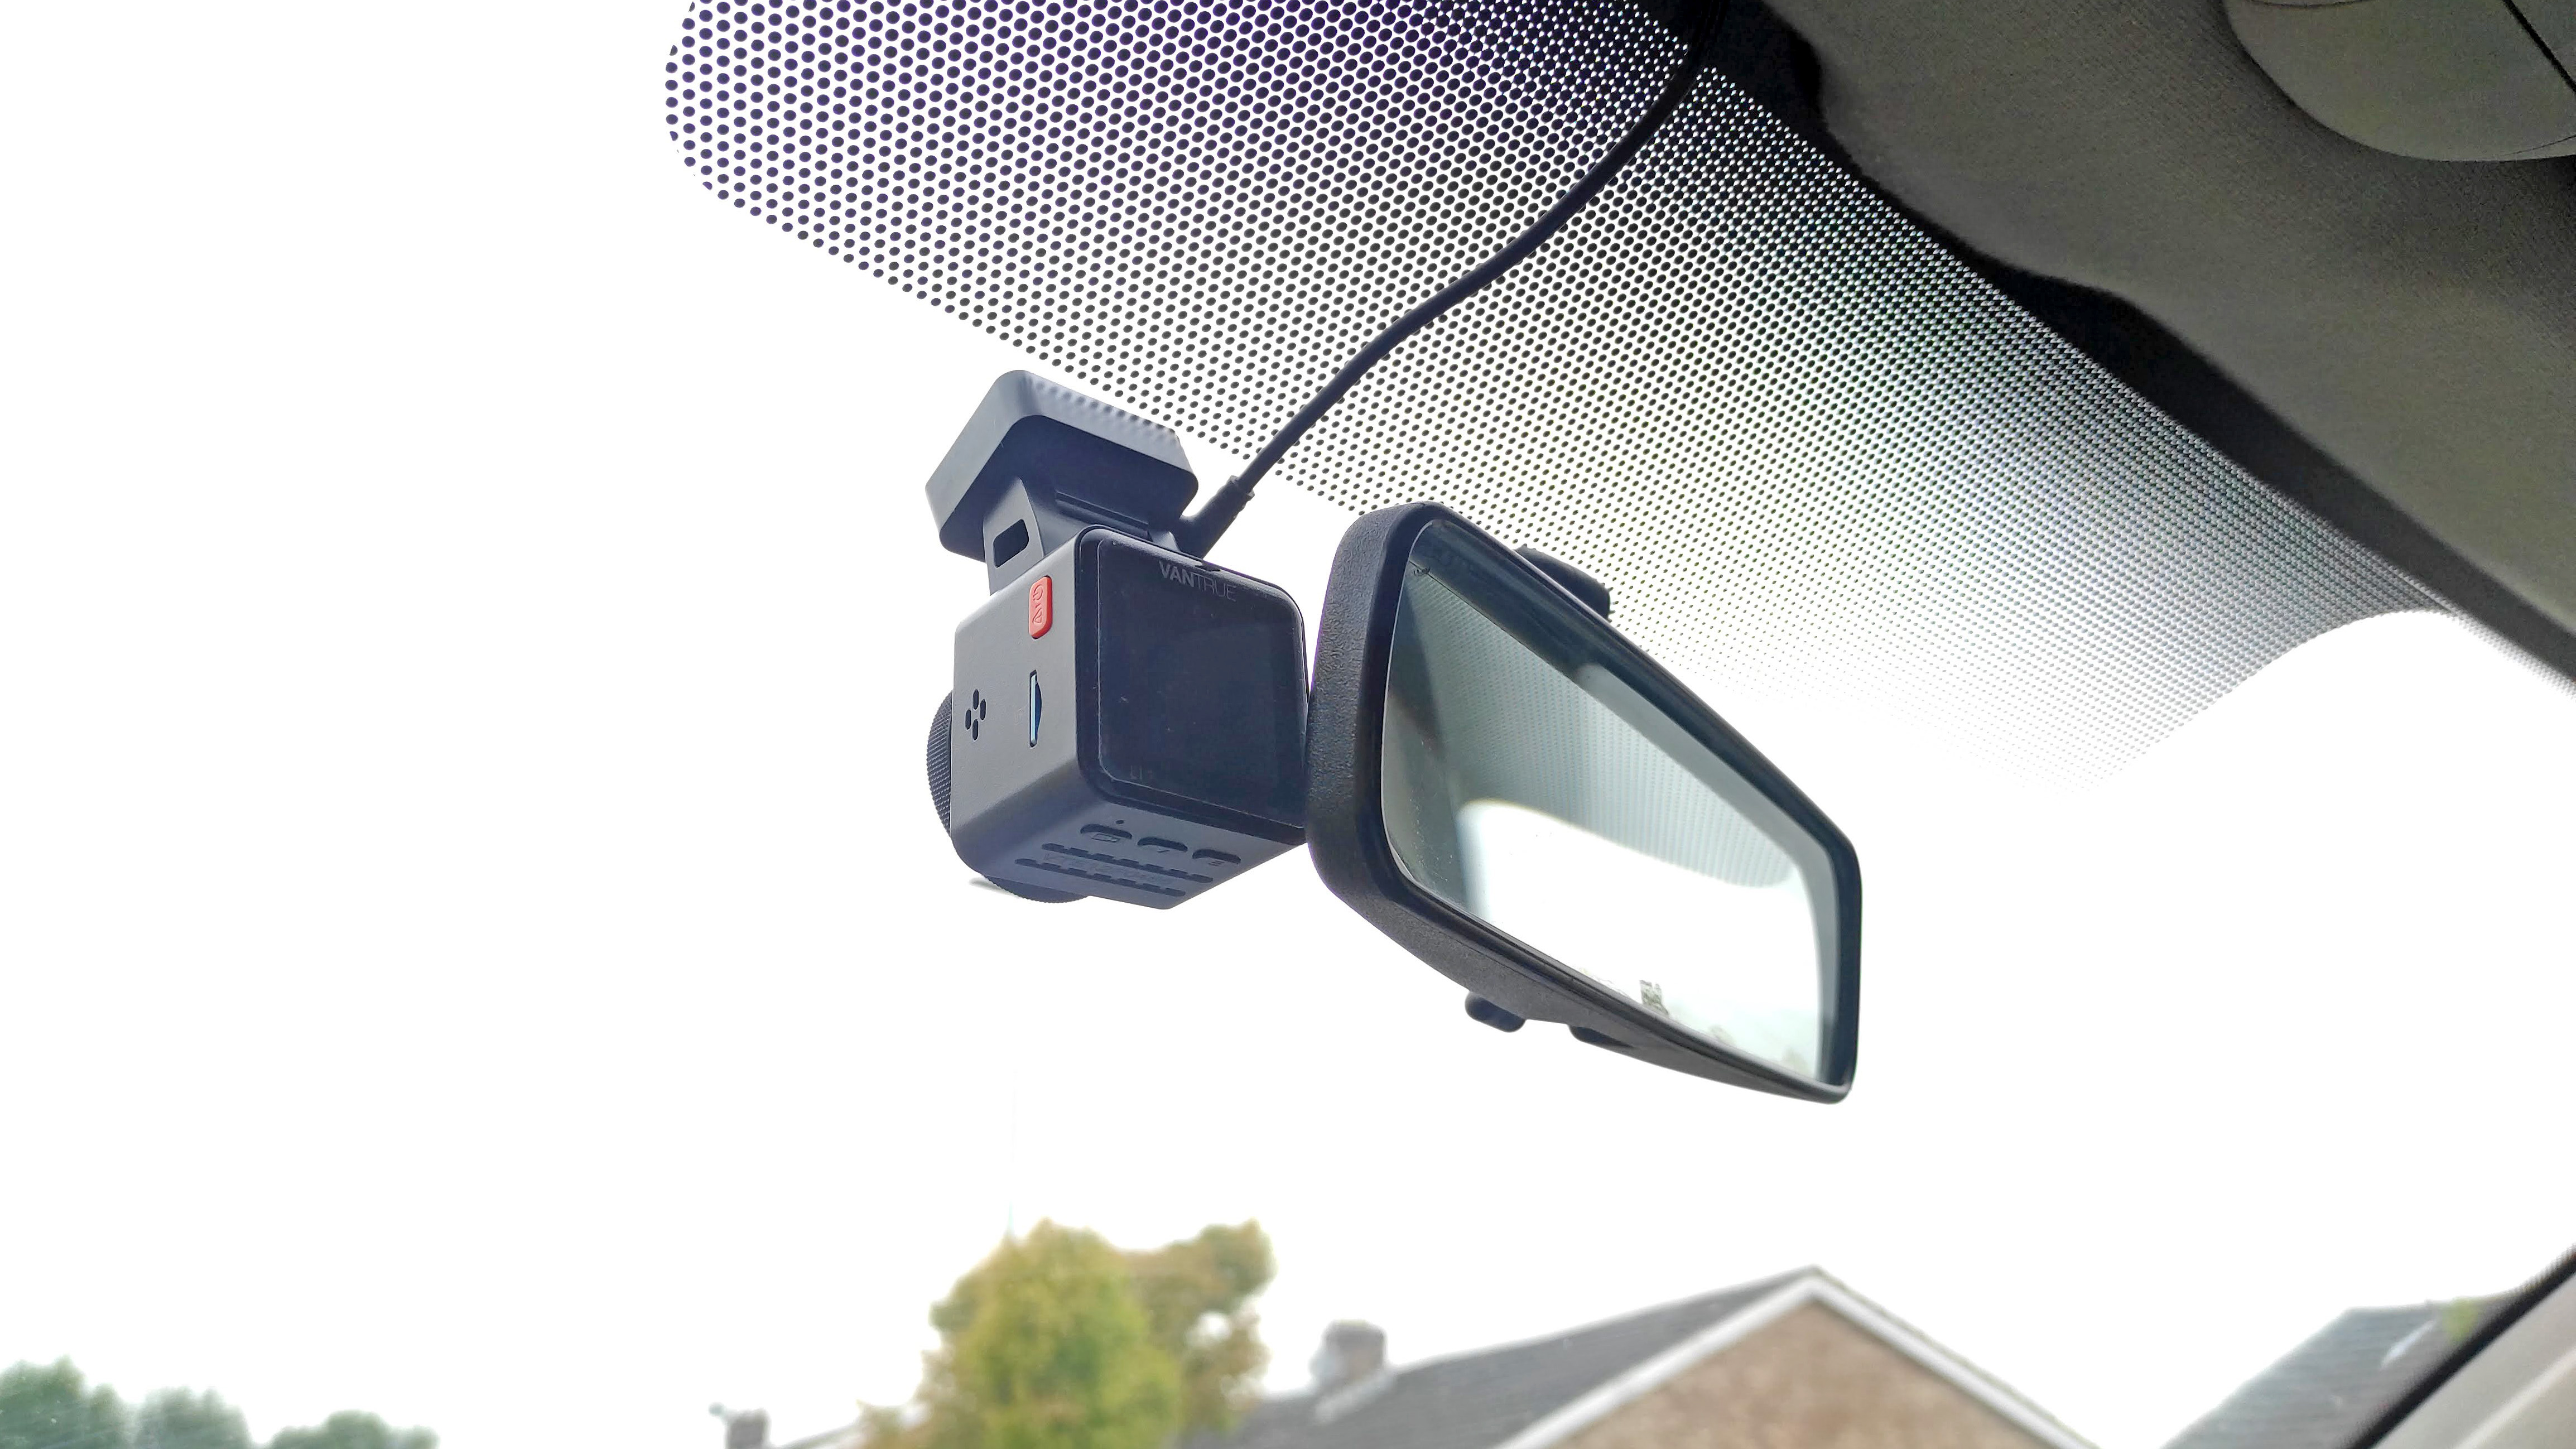 How to install a dashcam in your car